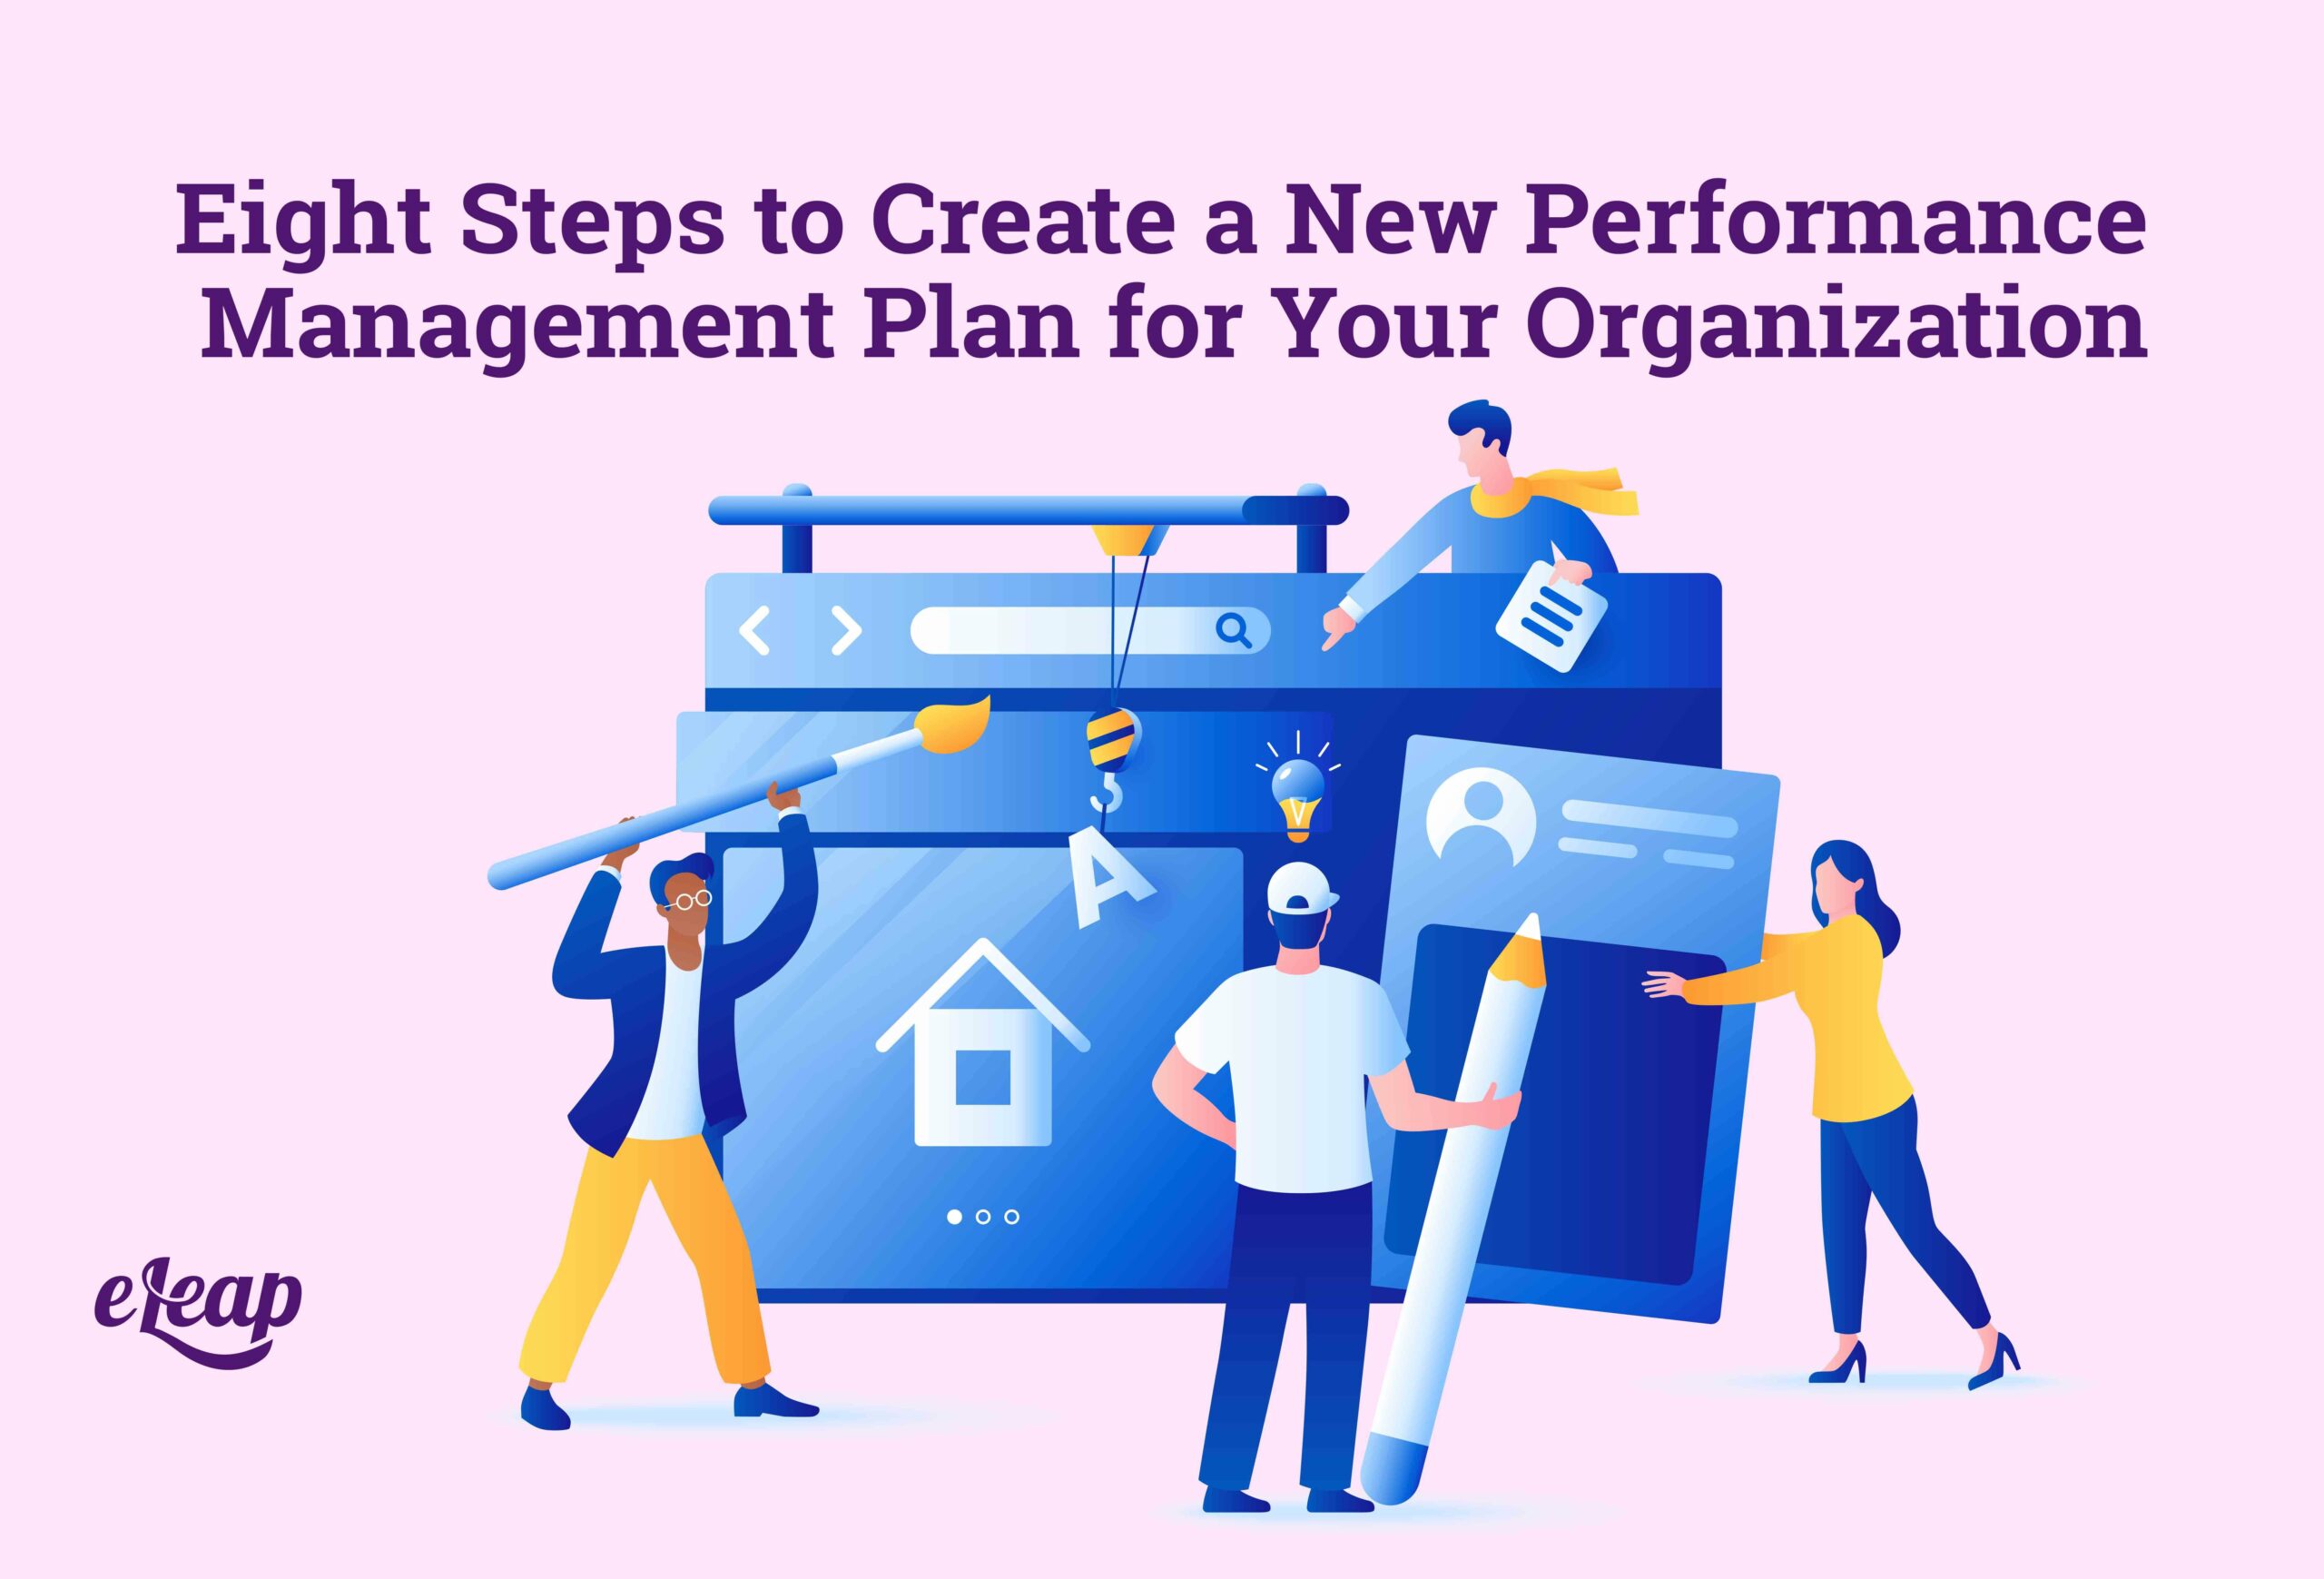 Eight Steps to Create a New Performance Management Plan for Your Organization